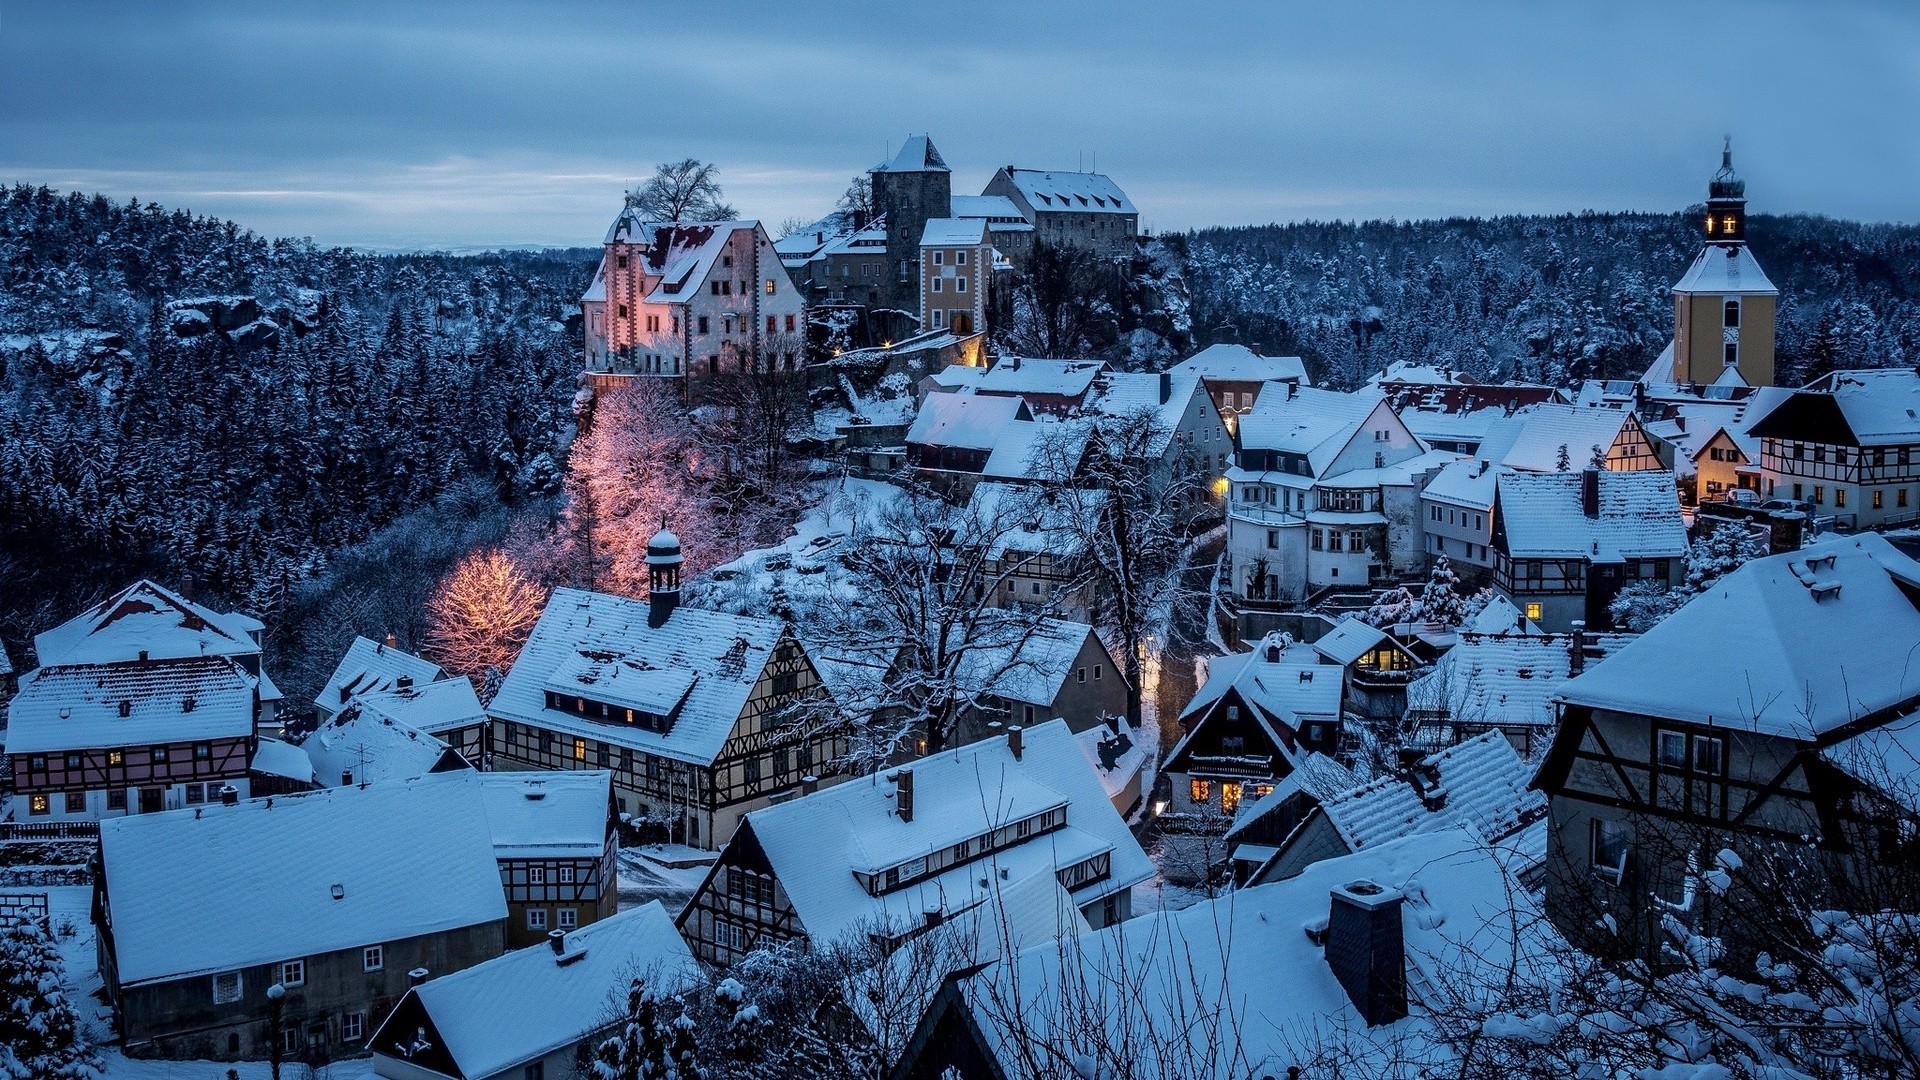 General 1920x1080 Germany castle old building rooftops dusk town snow idyllic